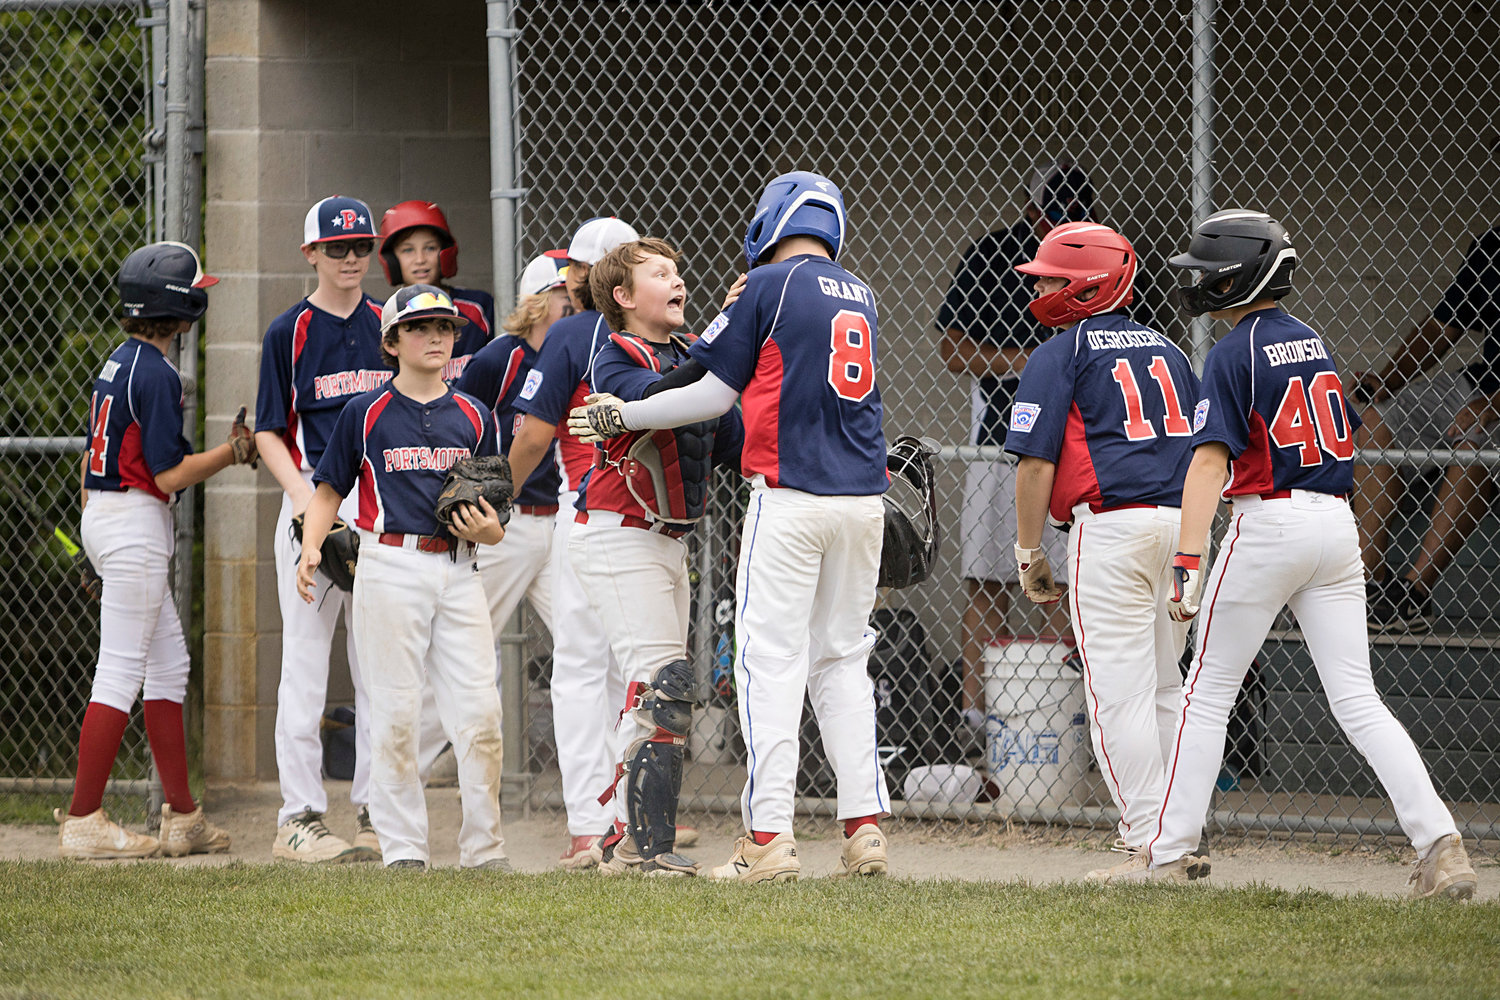 Portsmouth All-Stars celebrate after a successful inning against Bristol/Warren.